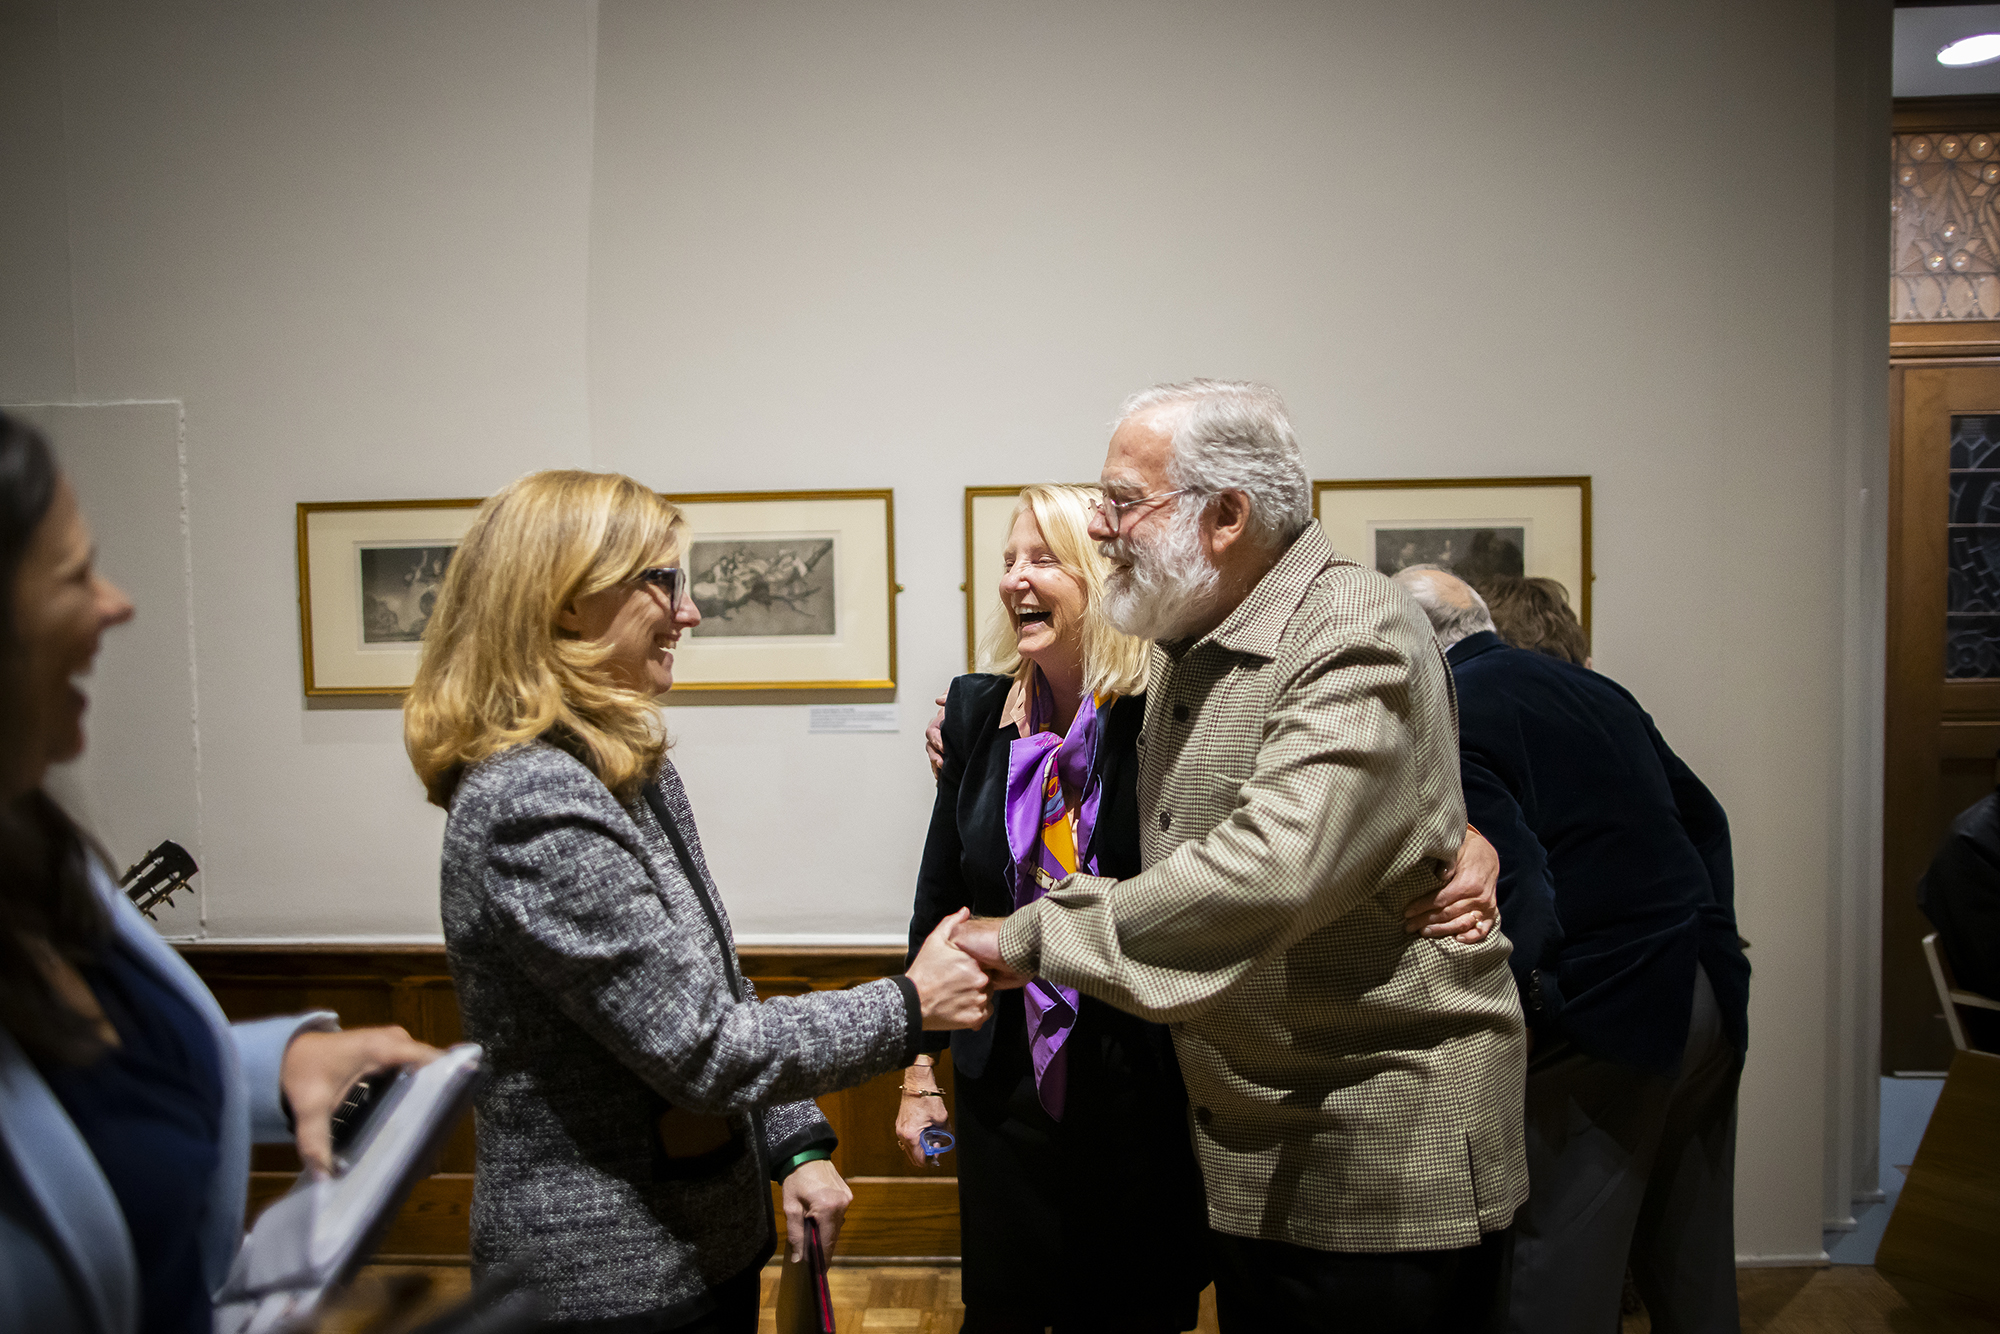 Two people shaking hands with another laughing in background at an art gallery exhibition